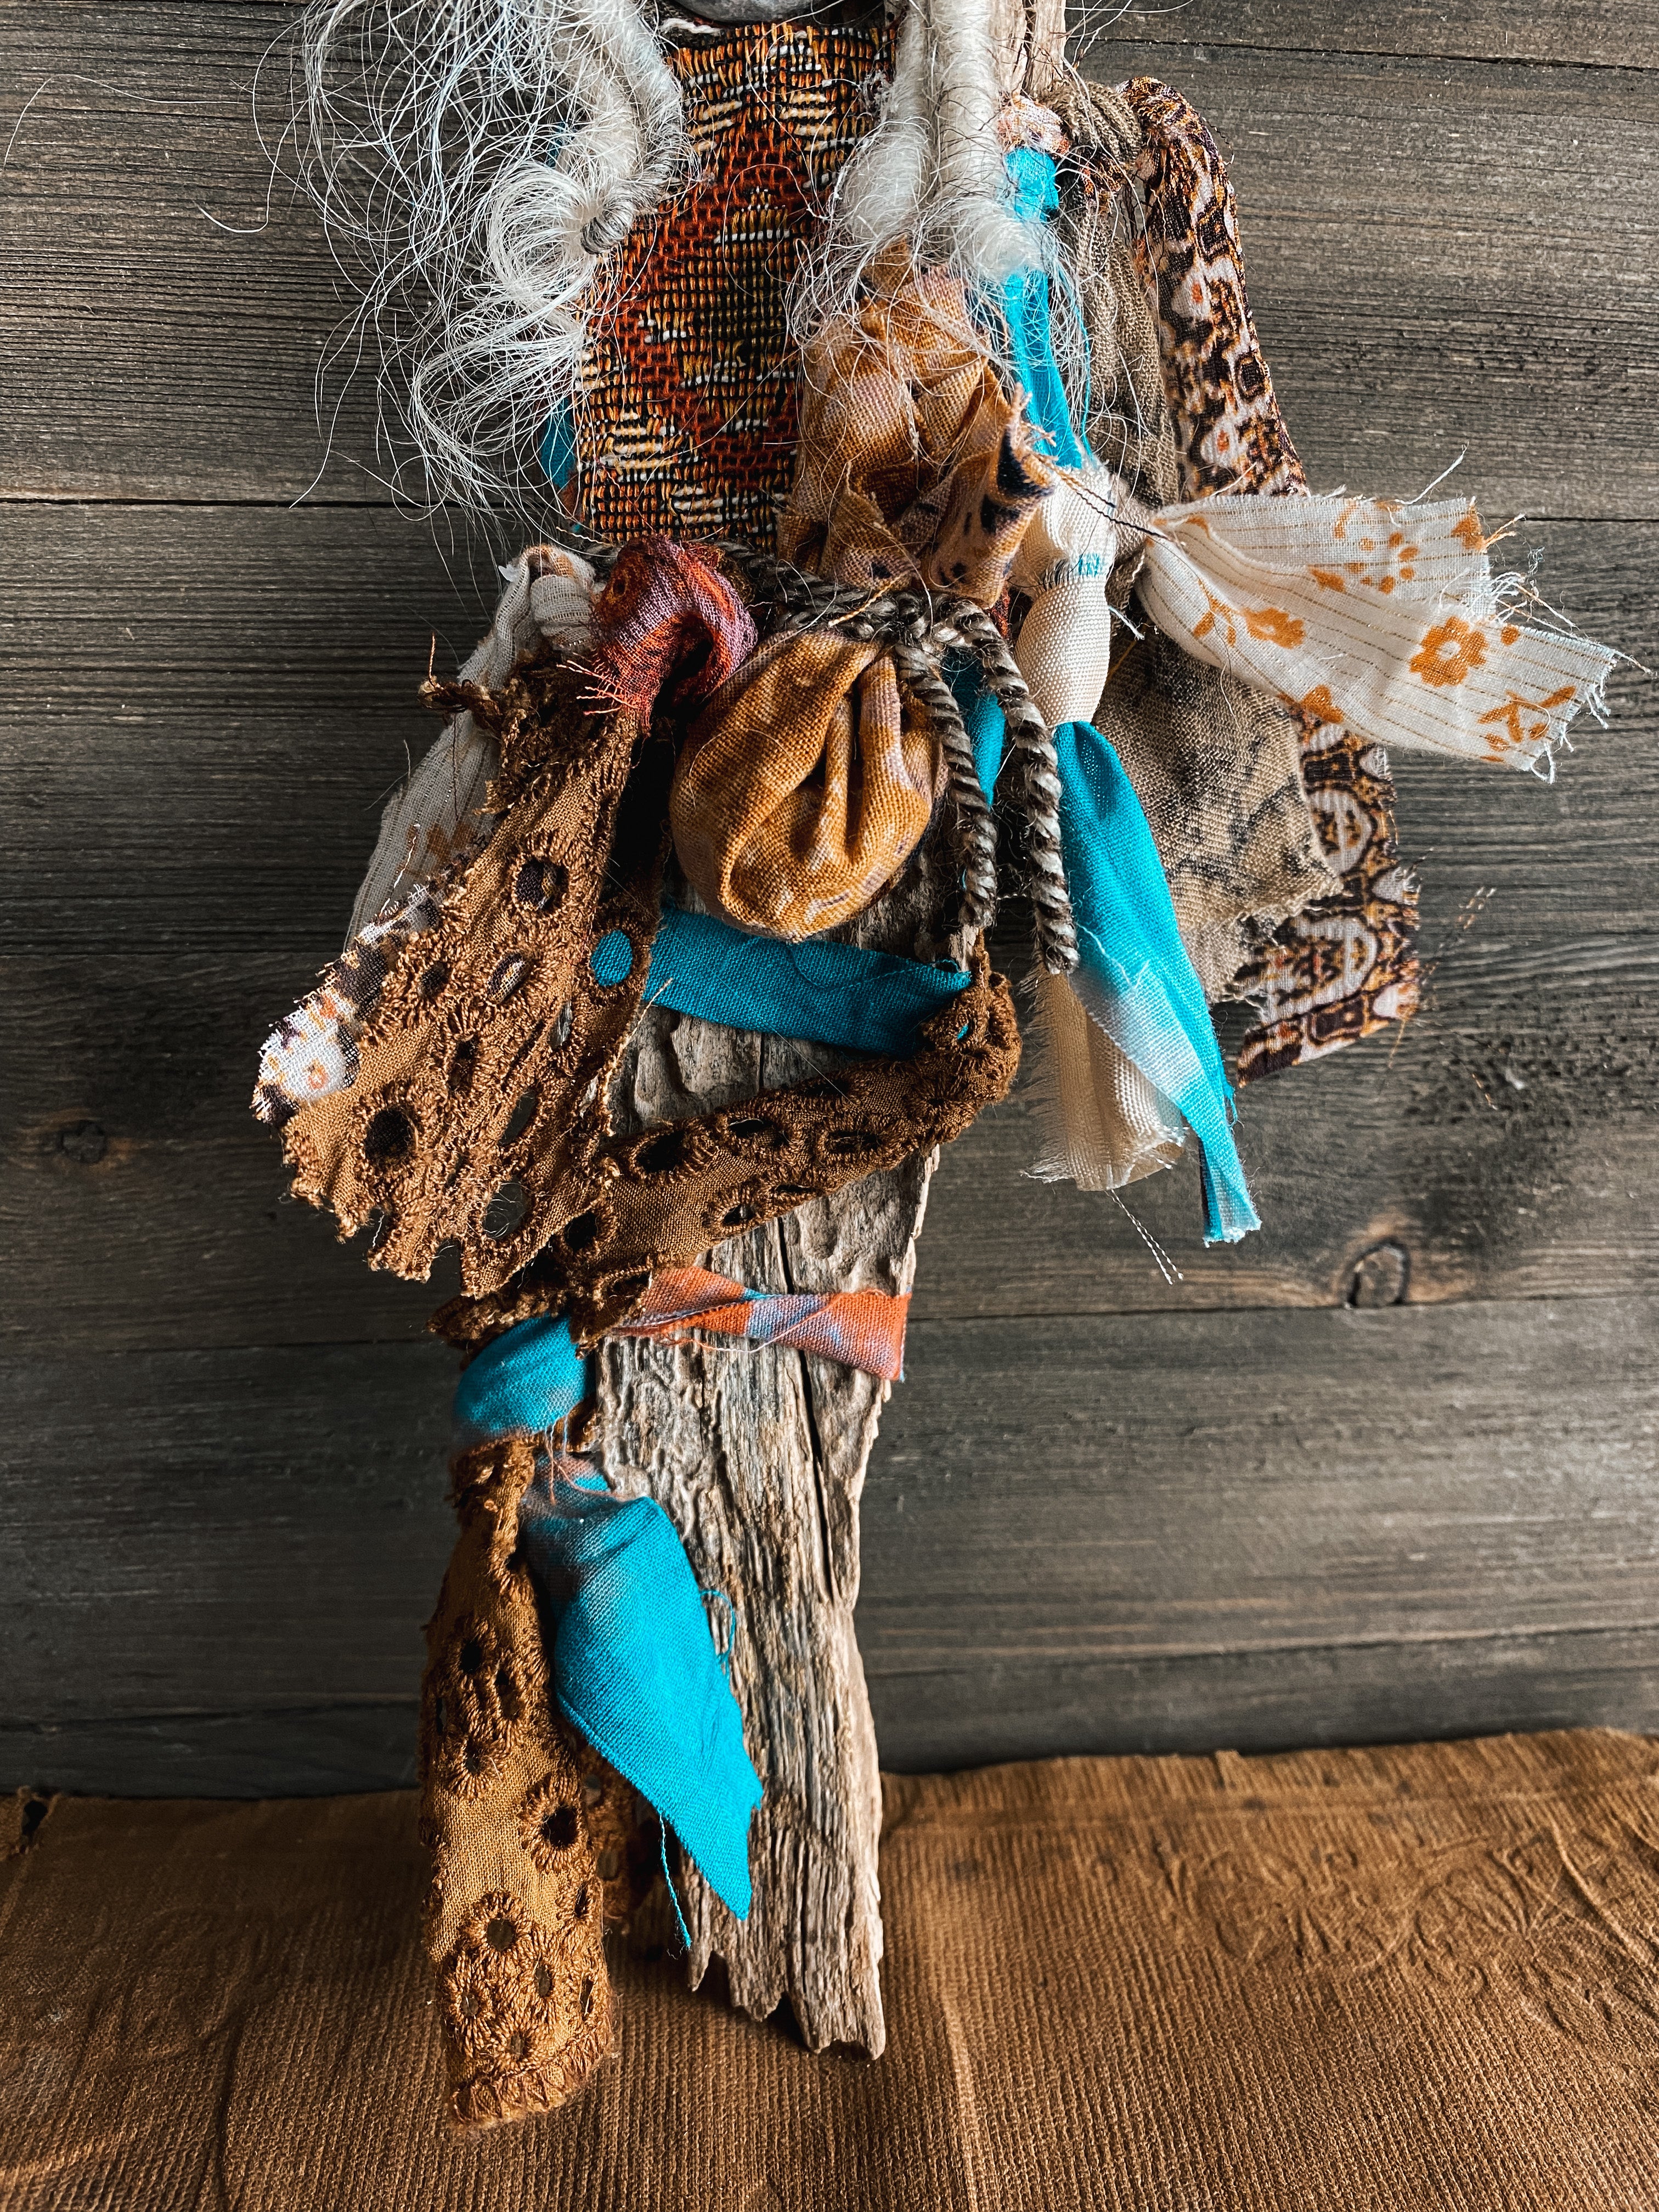 She of Letting Go - Sacred Medicine Doll for Letting go, Non-Attachment and Surrender